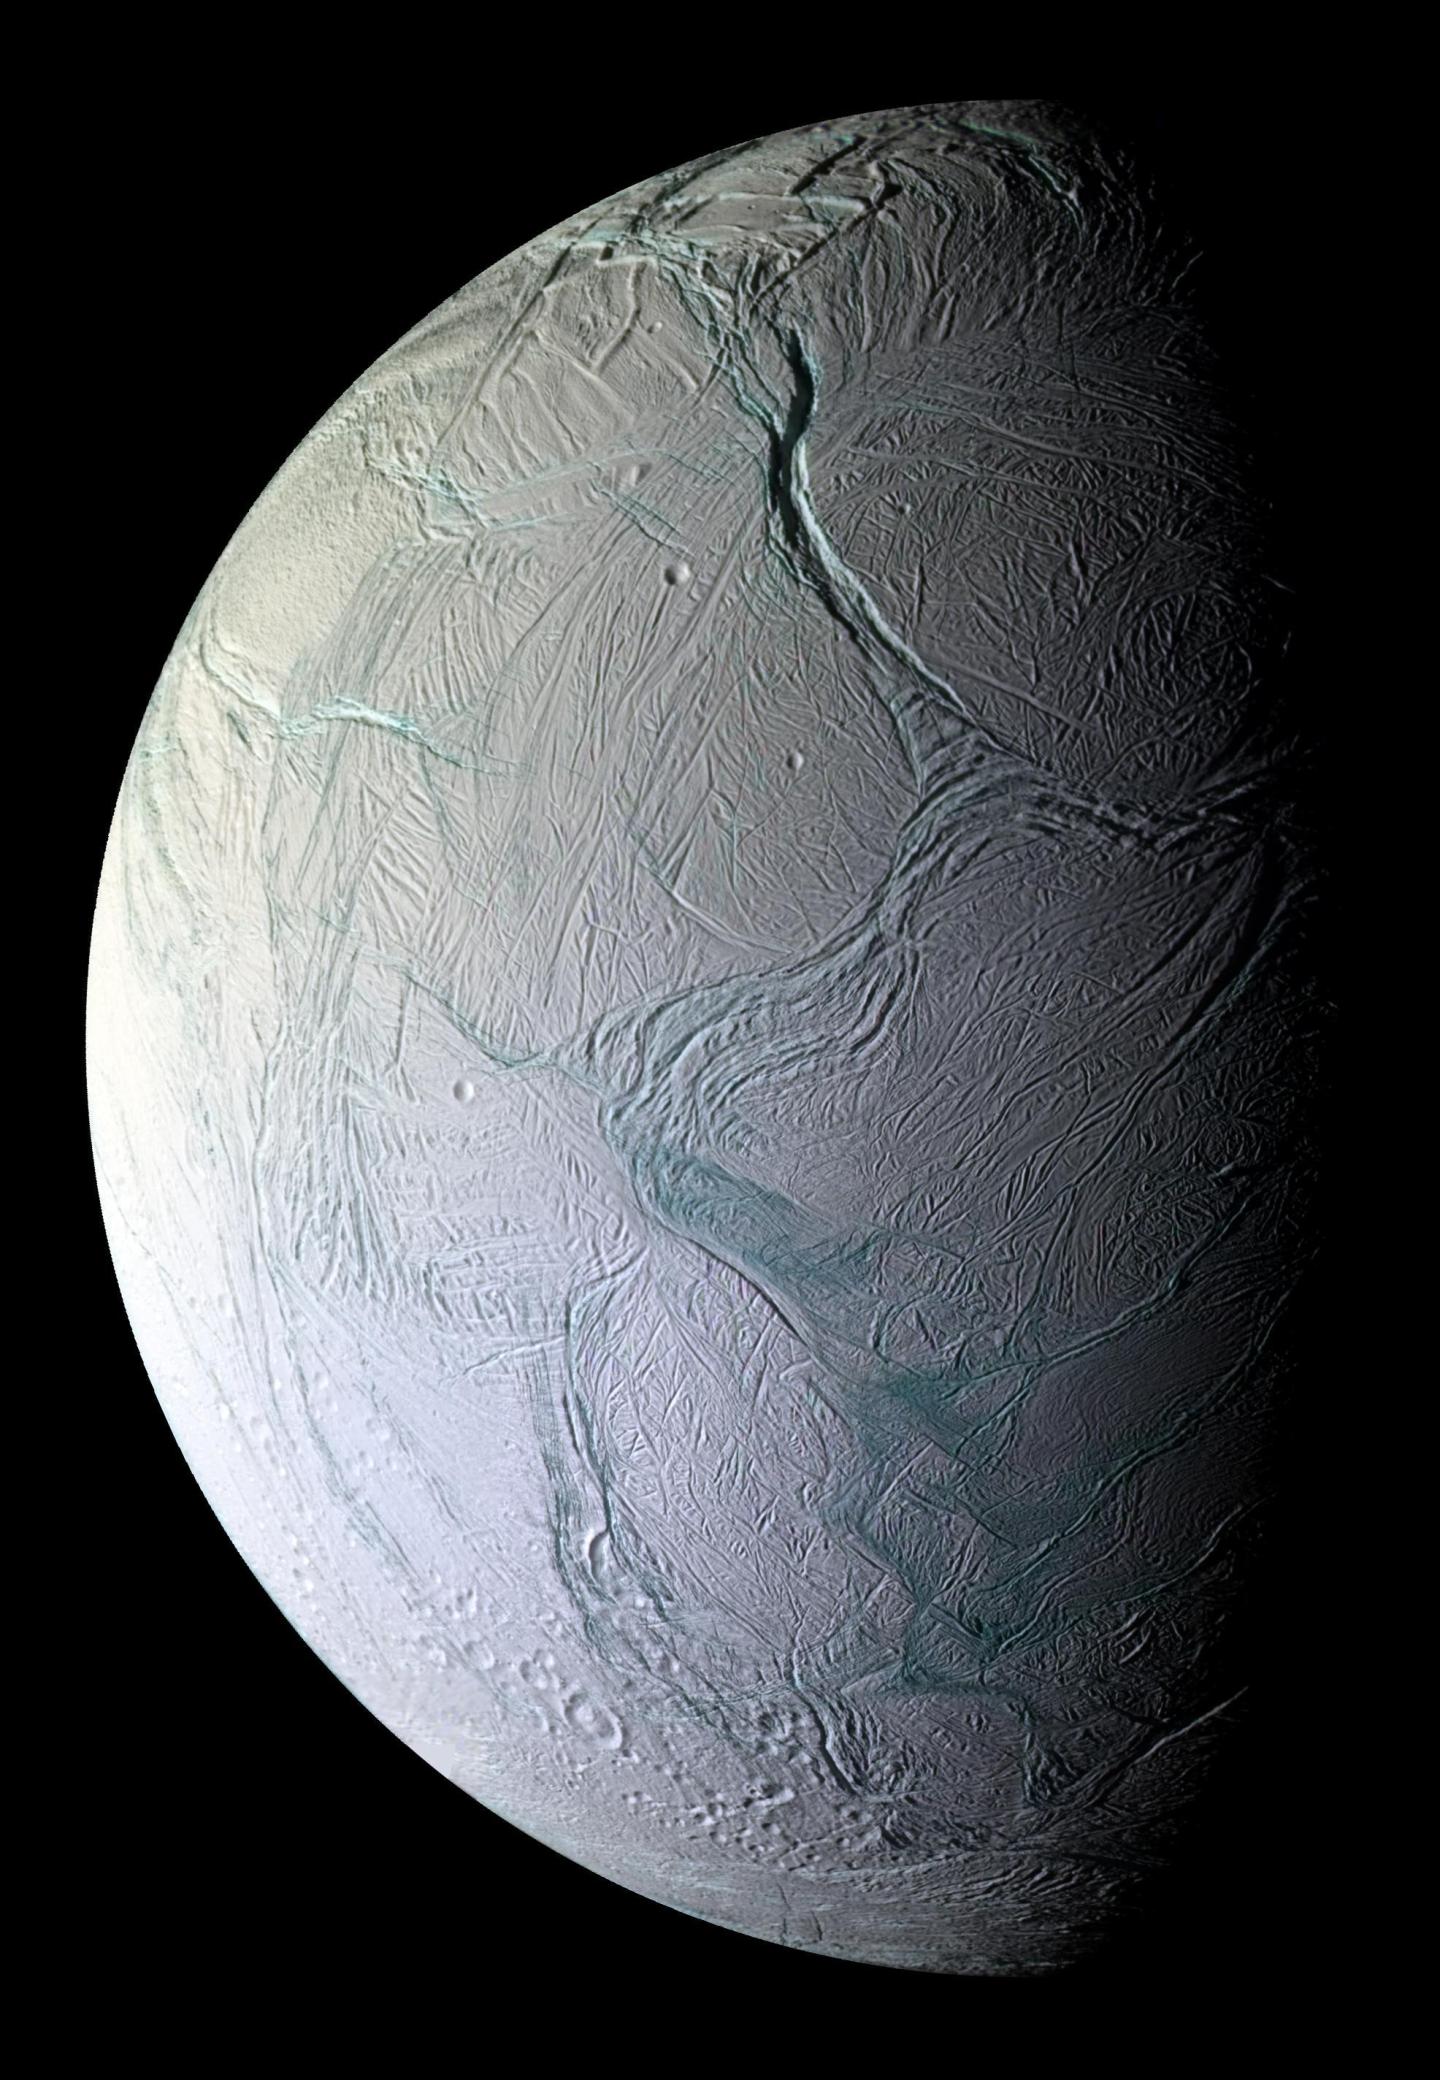 An image of the moon Enceladus, with a cracked icy surface. 